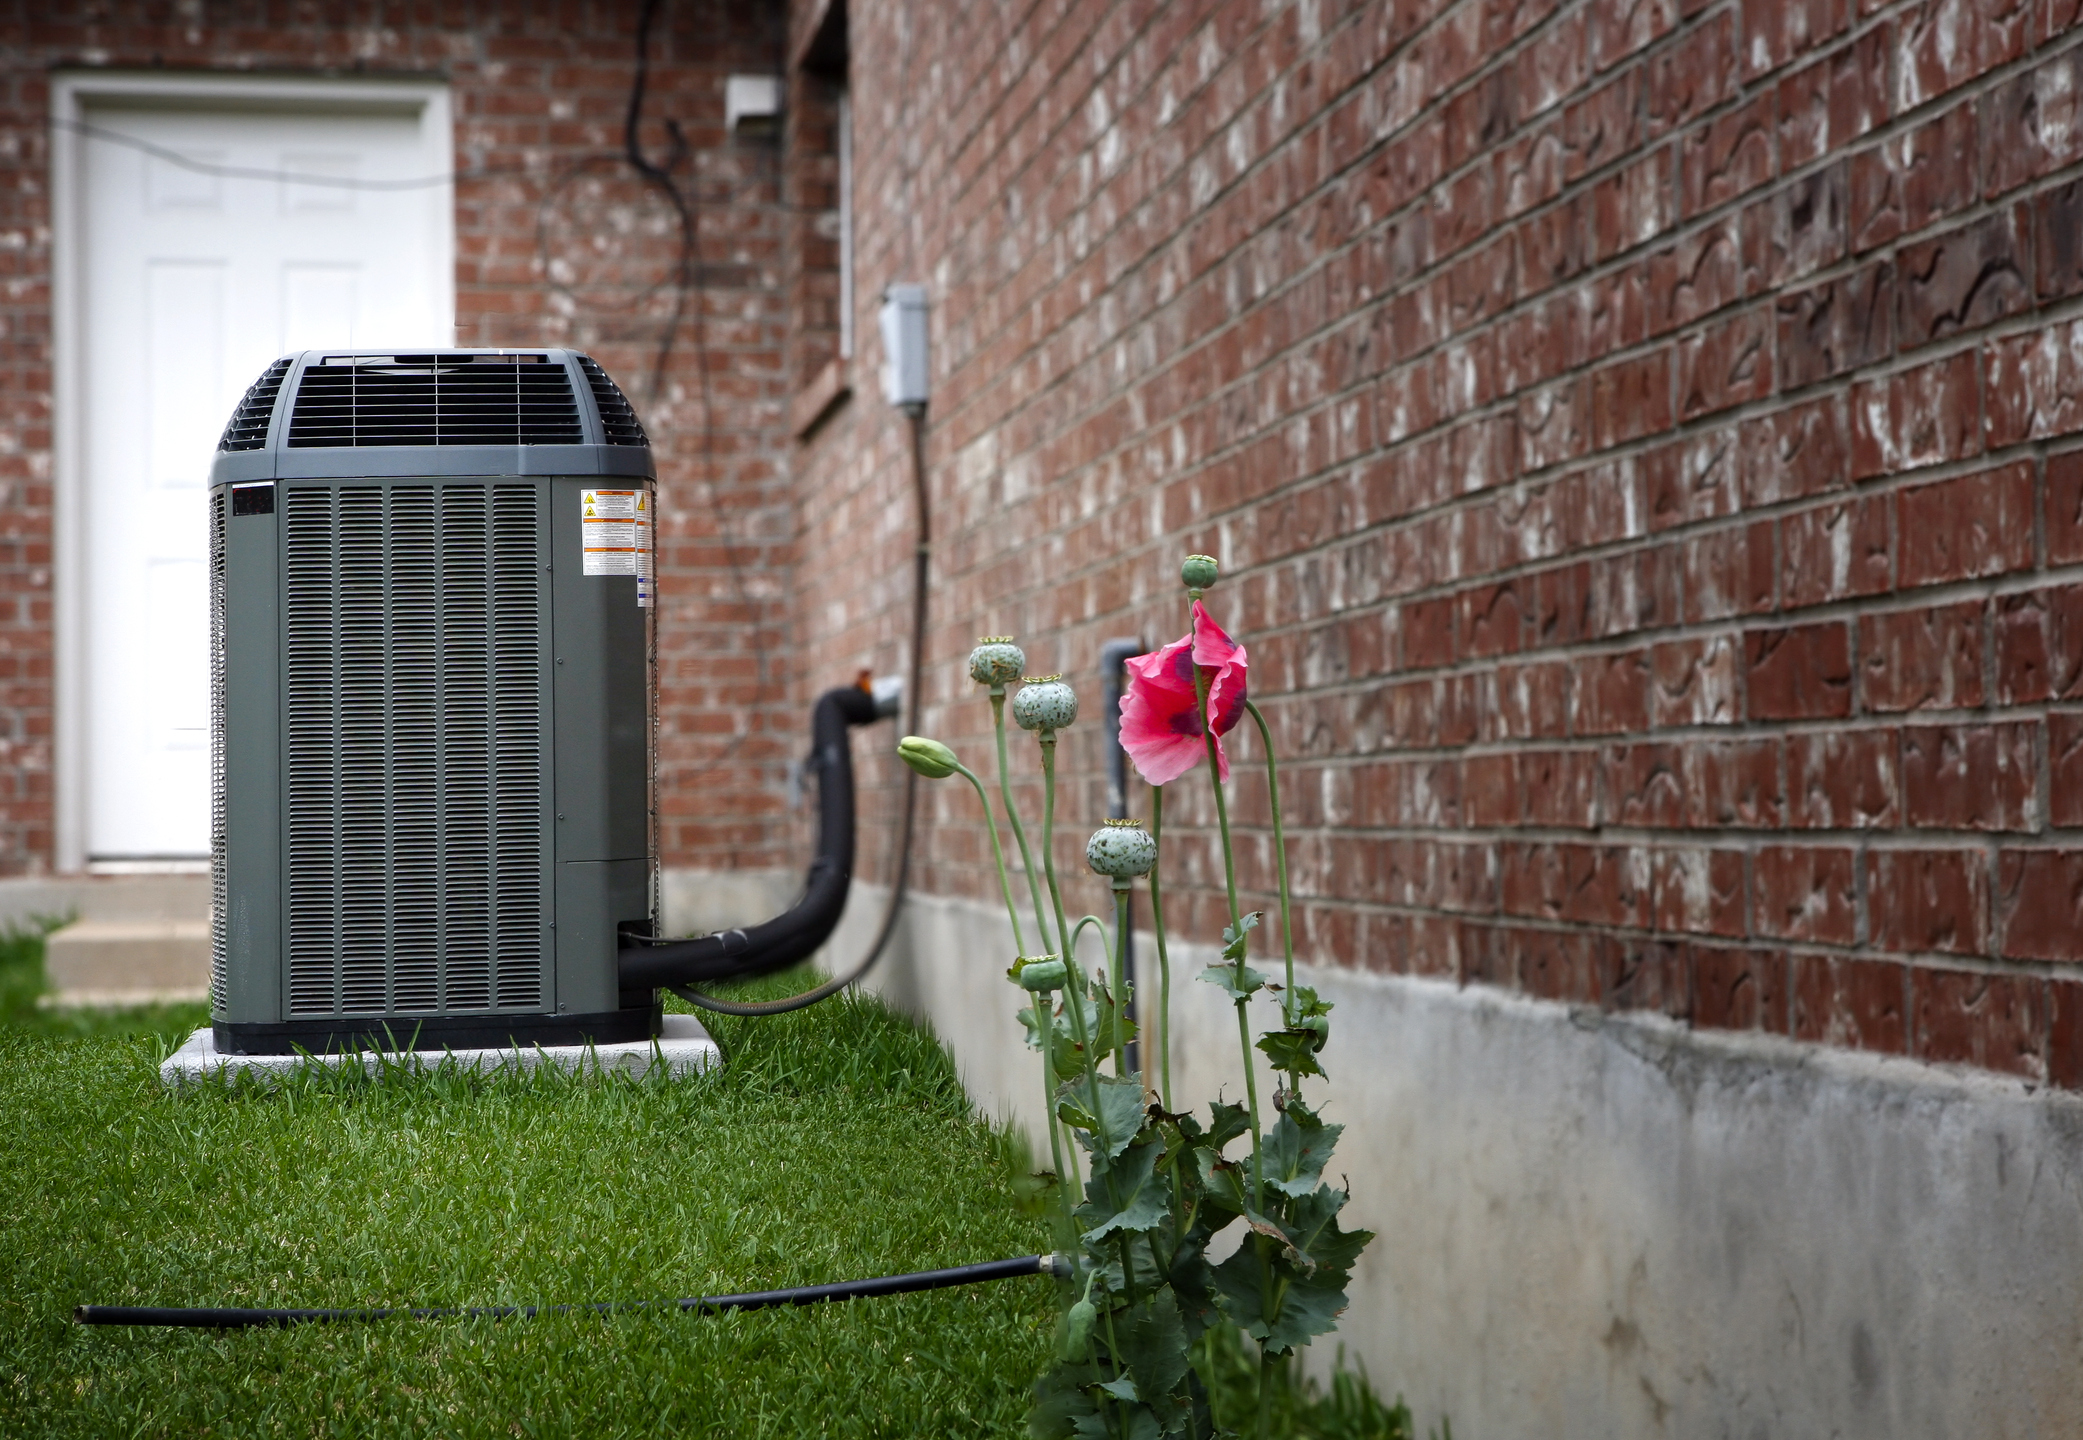 Modern HVAC unit next to a brick home with a small pink flower in the foreground